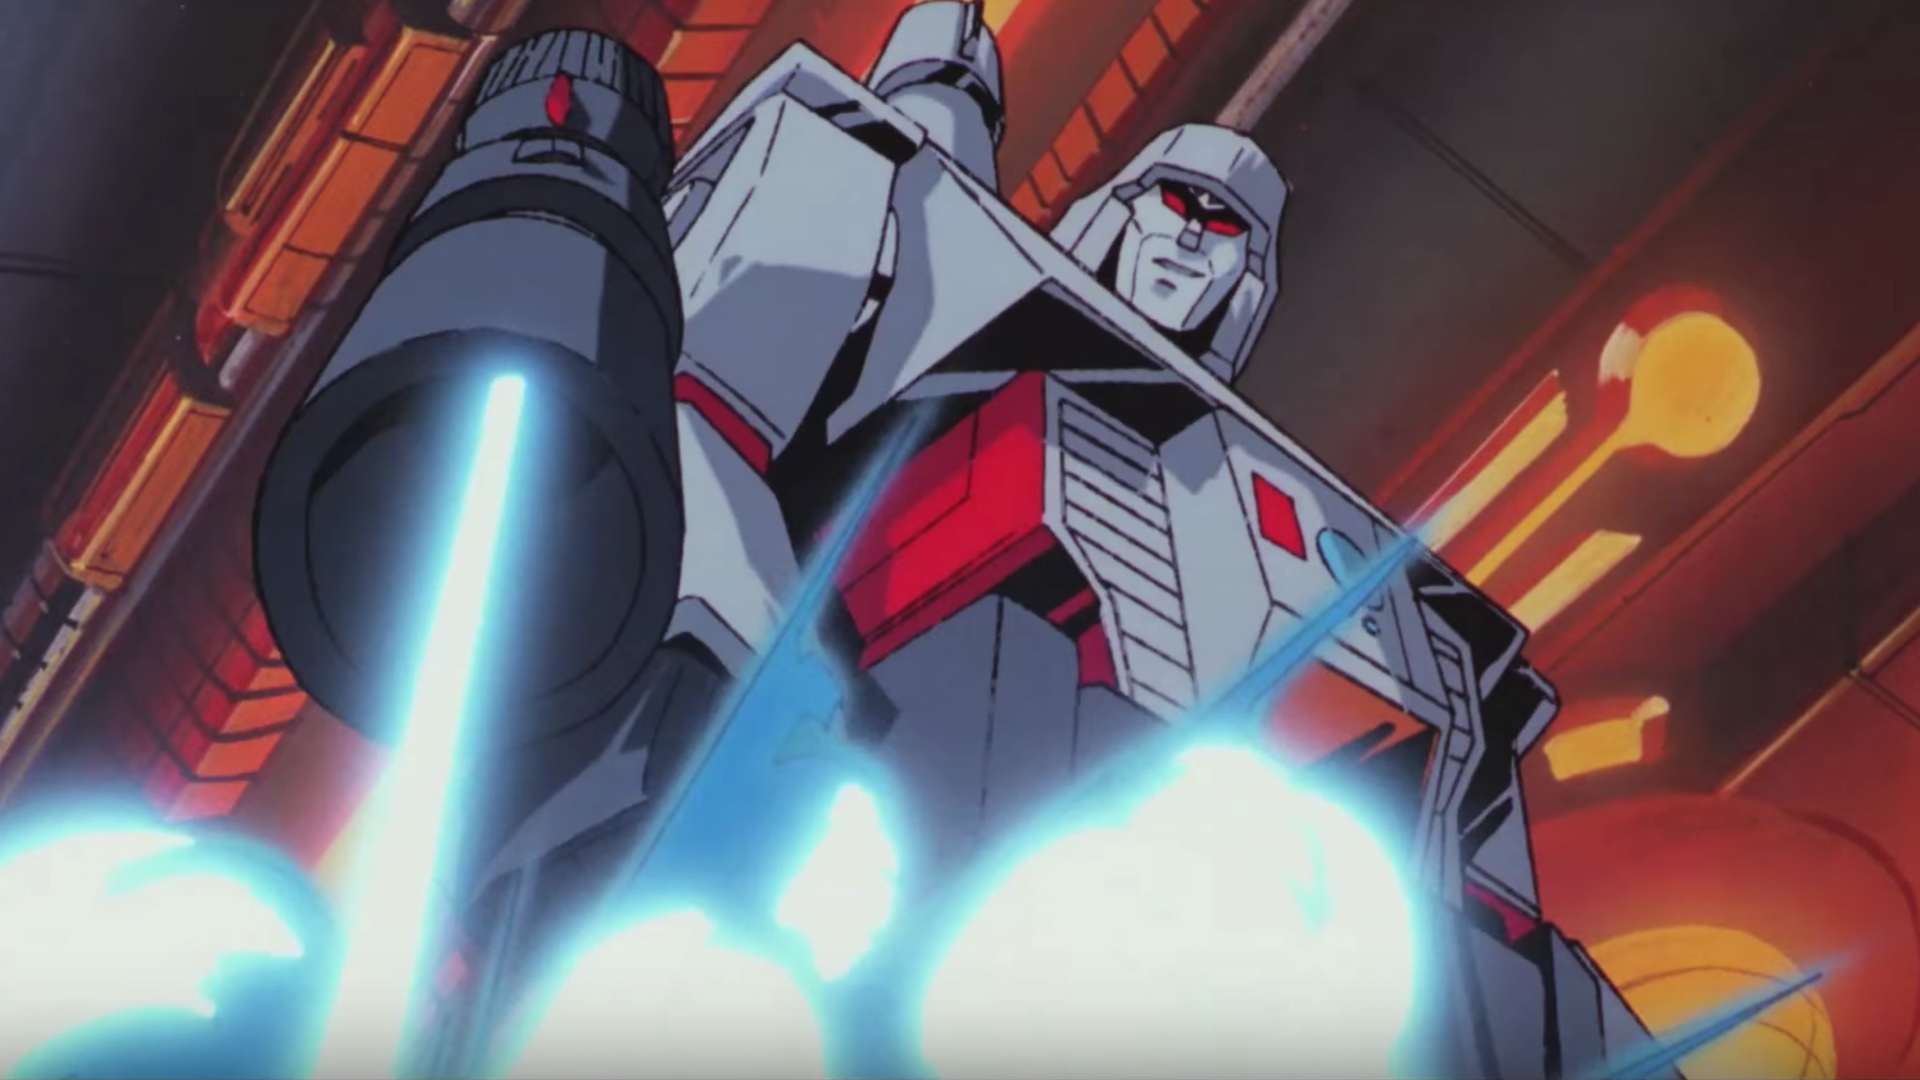 We're Getting A Transformers Animated Movie From Toy Story 4 Director